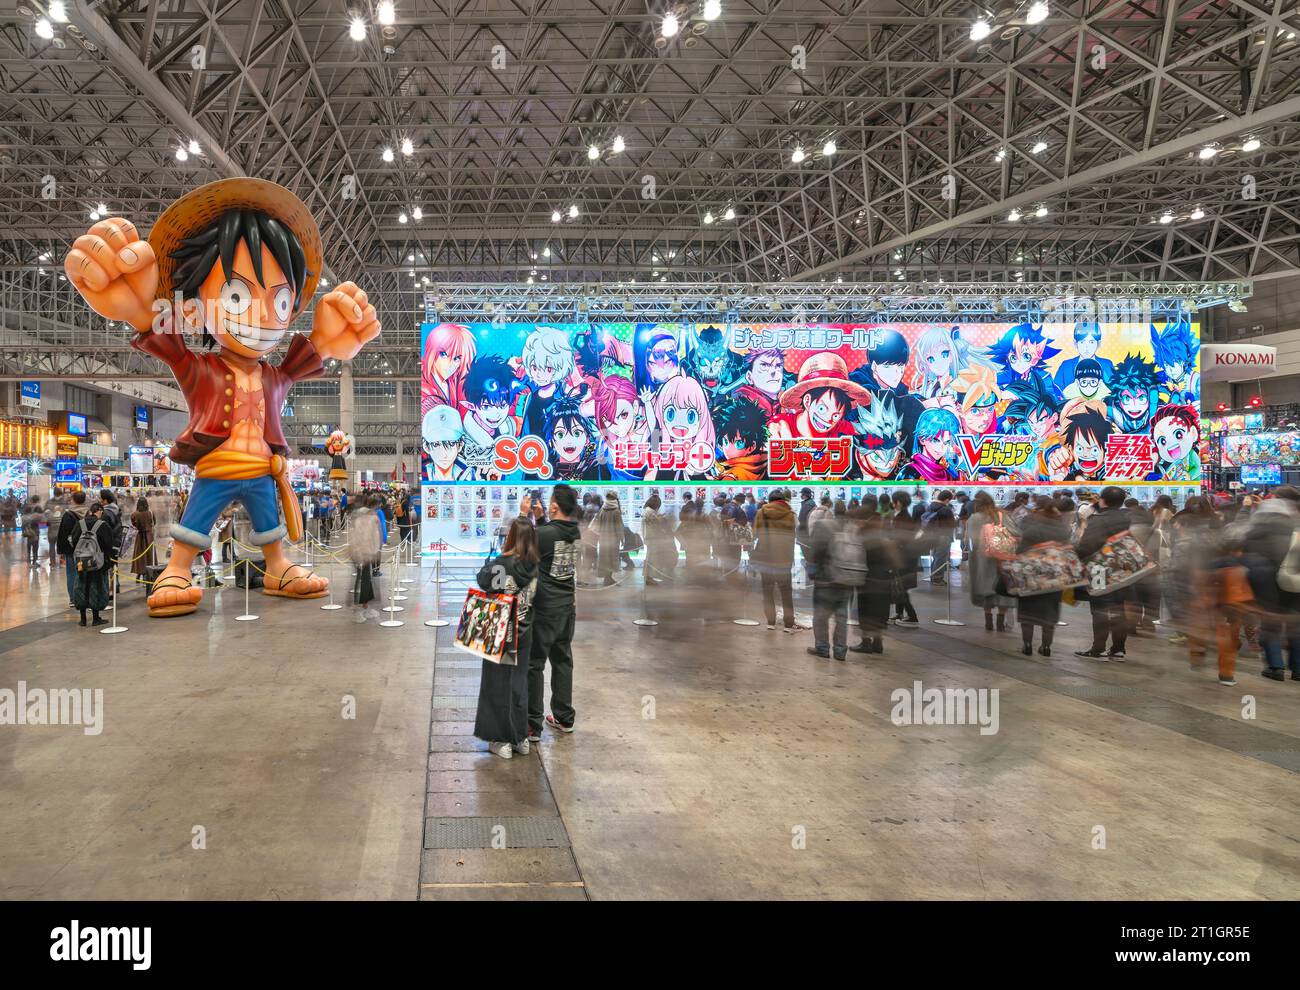 chiba, japan - dec 18 2022: Inflatable manga character of Japanese anime series One Piece raising arms in air welcoming consumers aside a huge placard Stock Photo